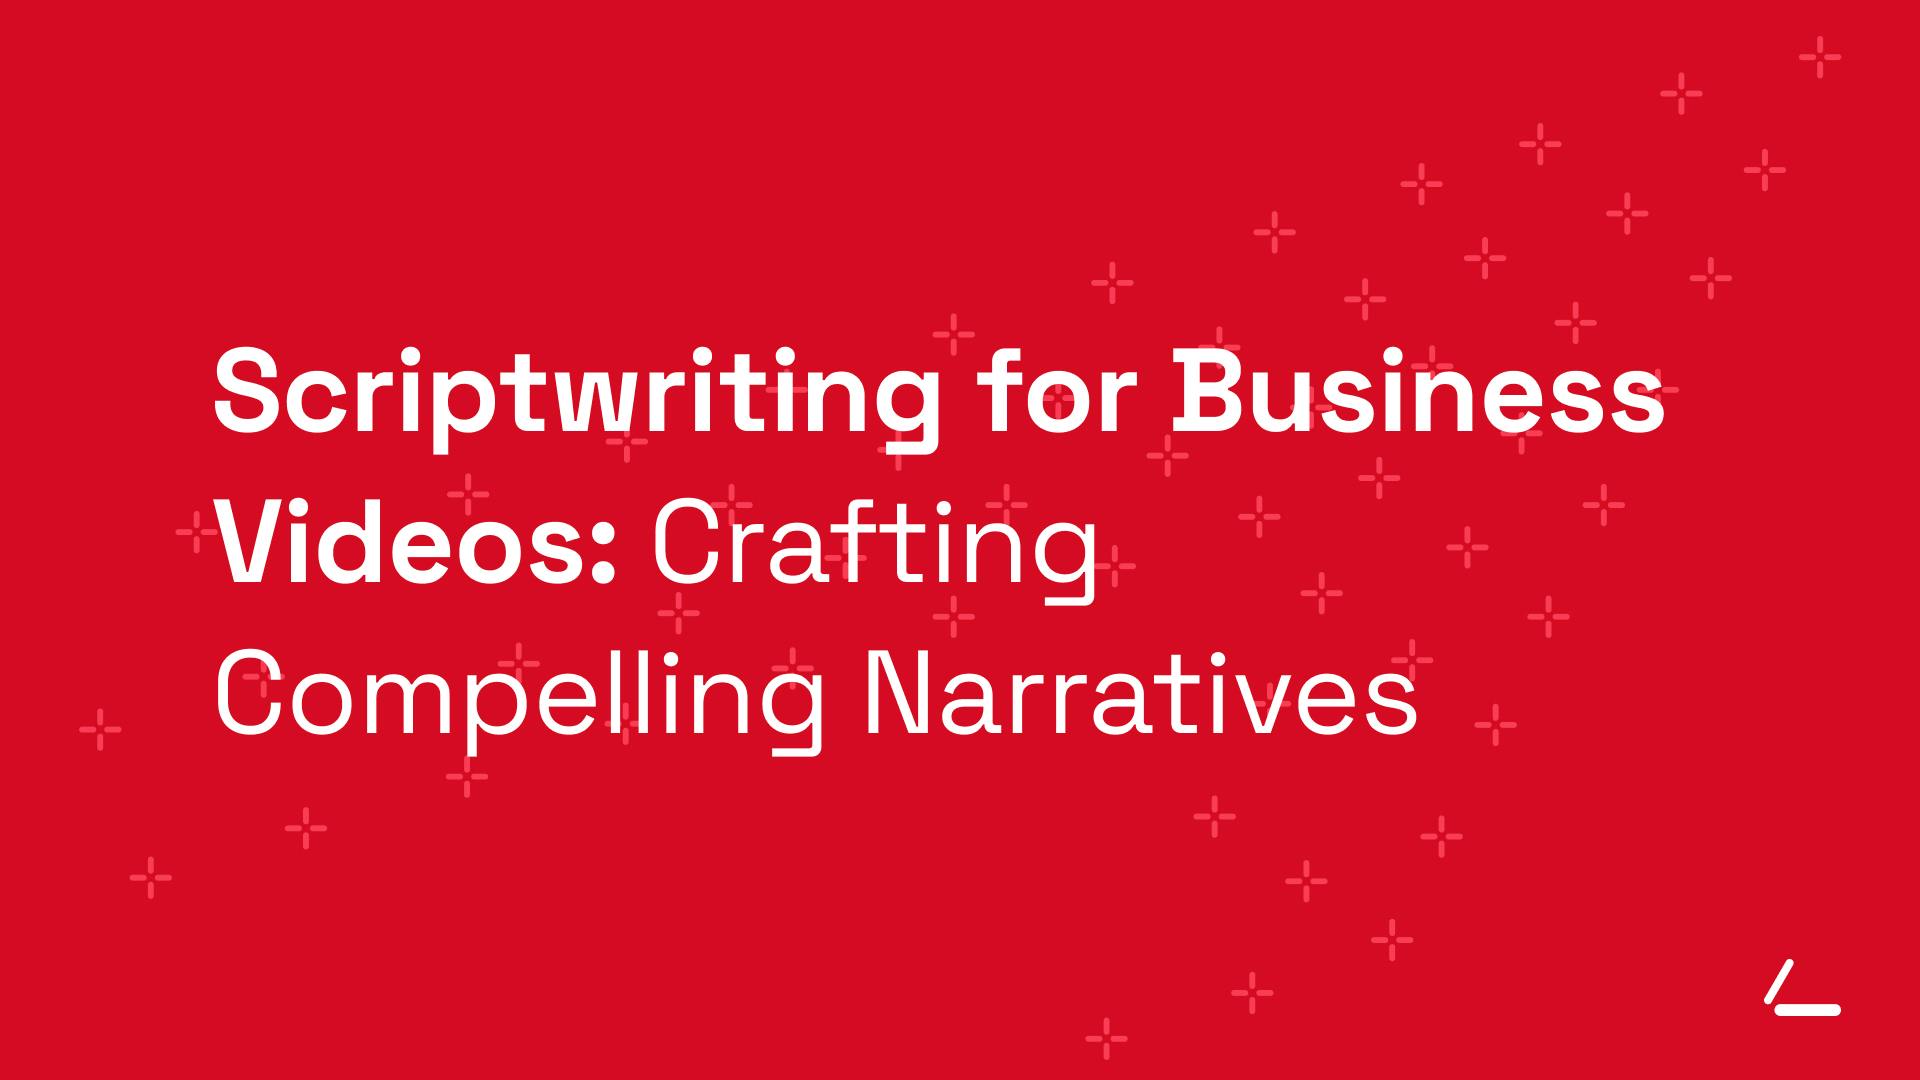 SEO Article Header - Red background with text about Scriptwriting